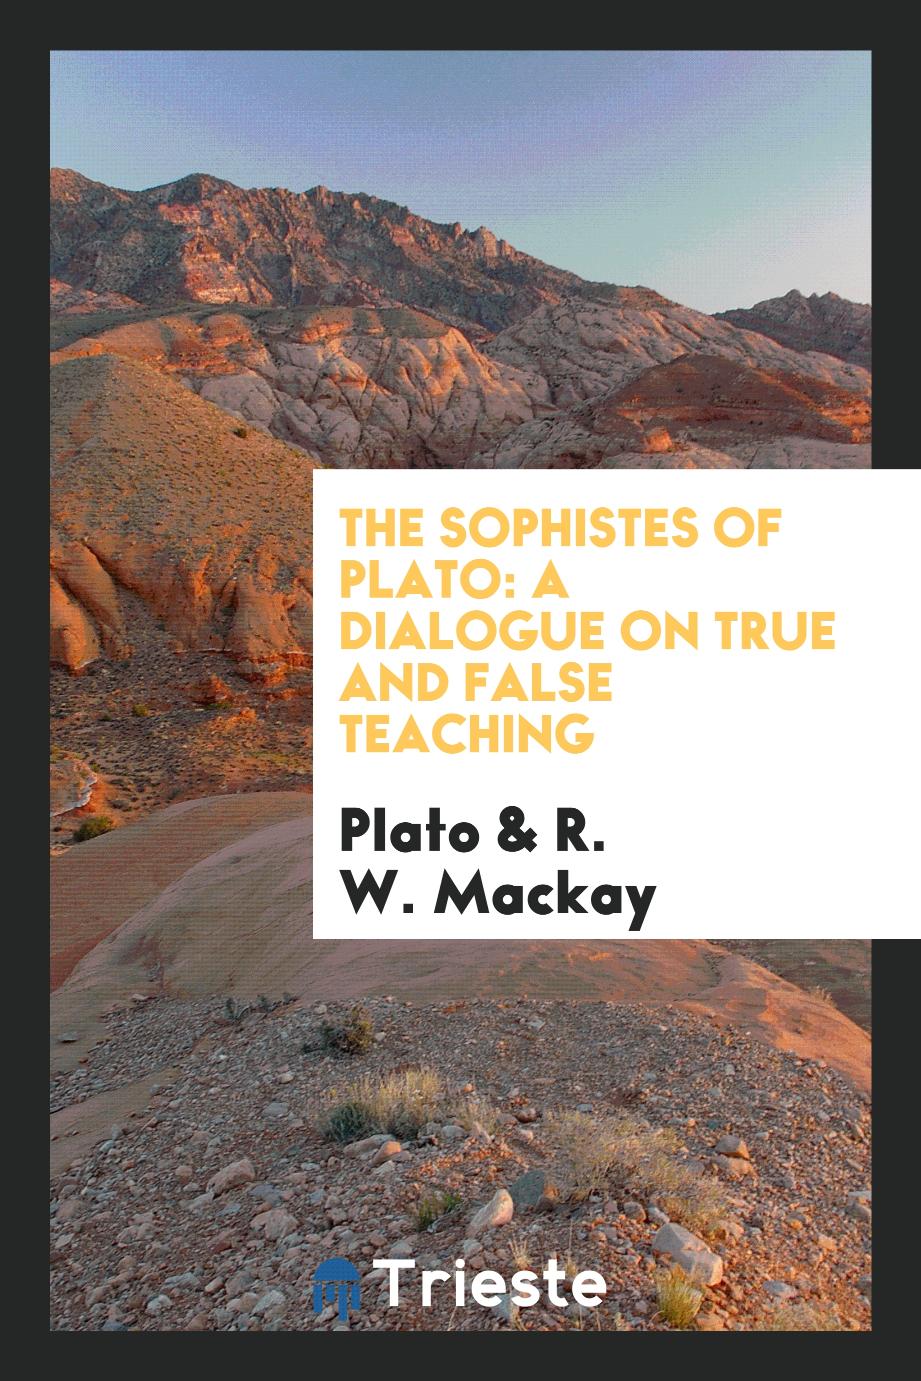 The Sophistes of Plato: a dialogue on true and false teaching